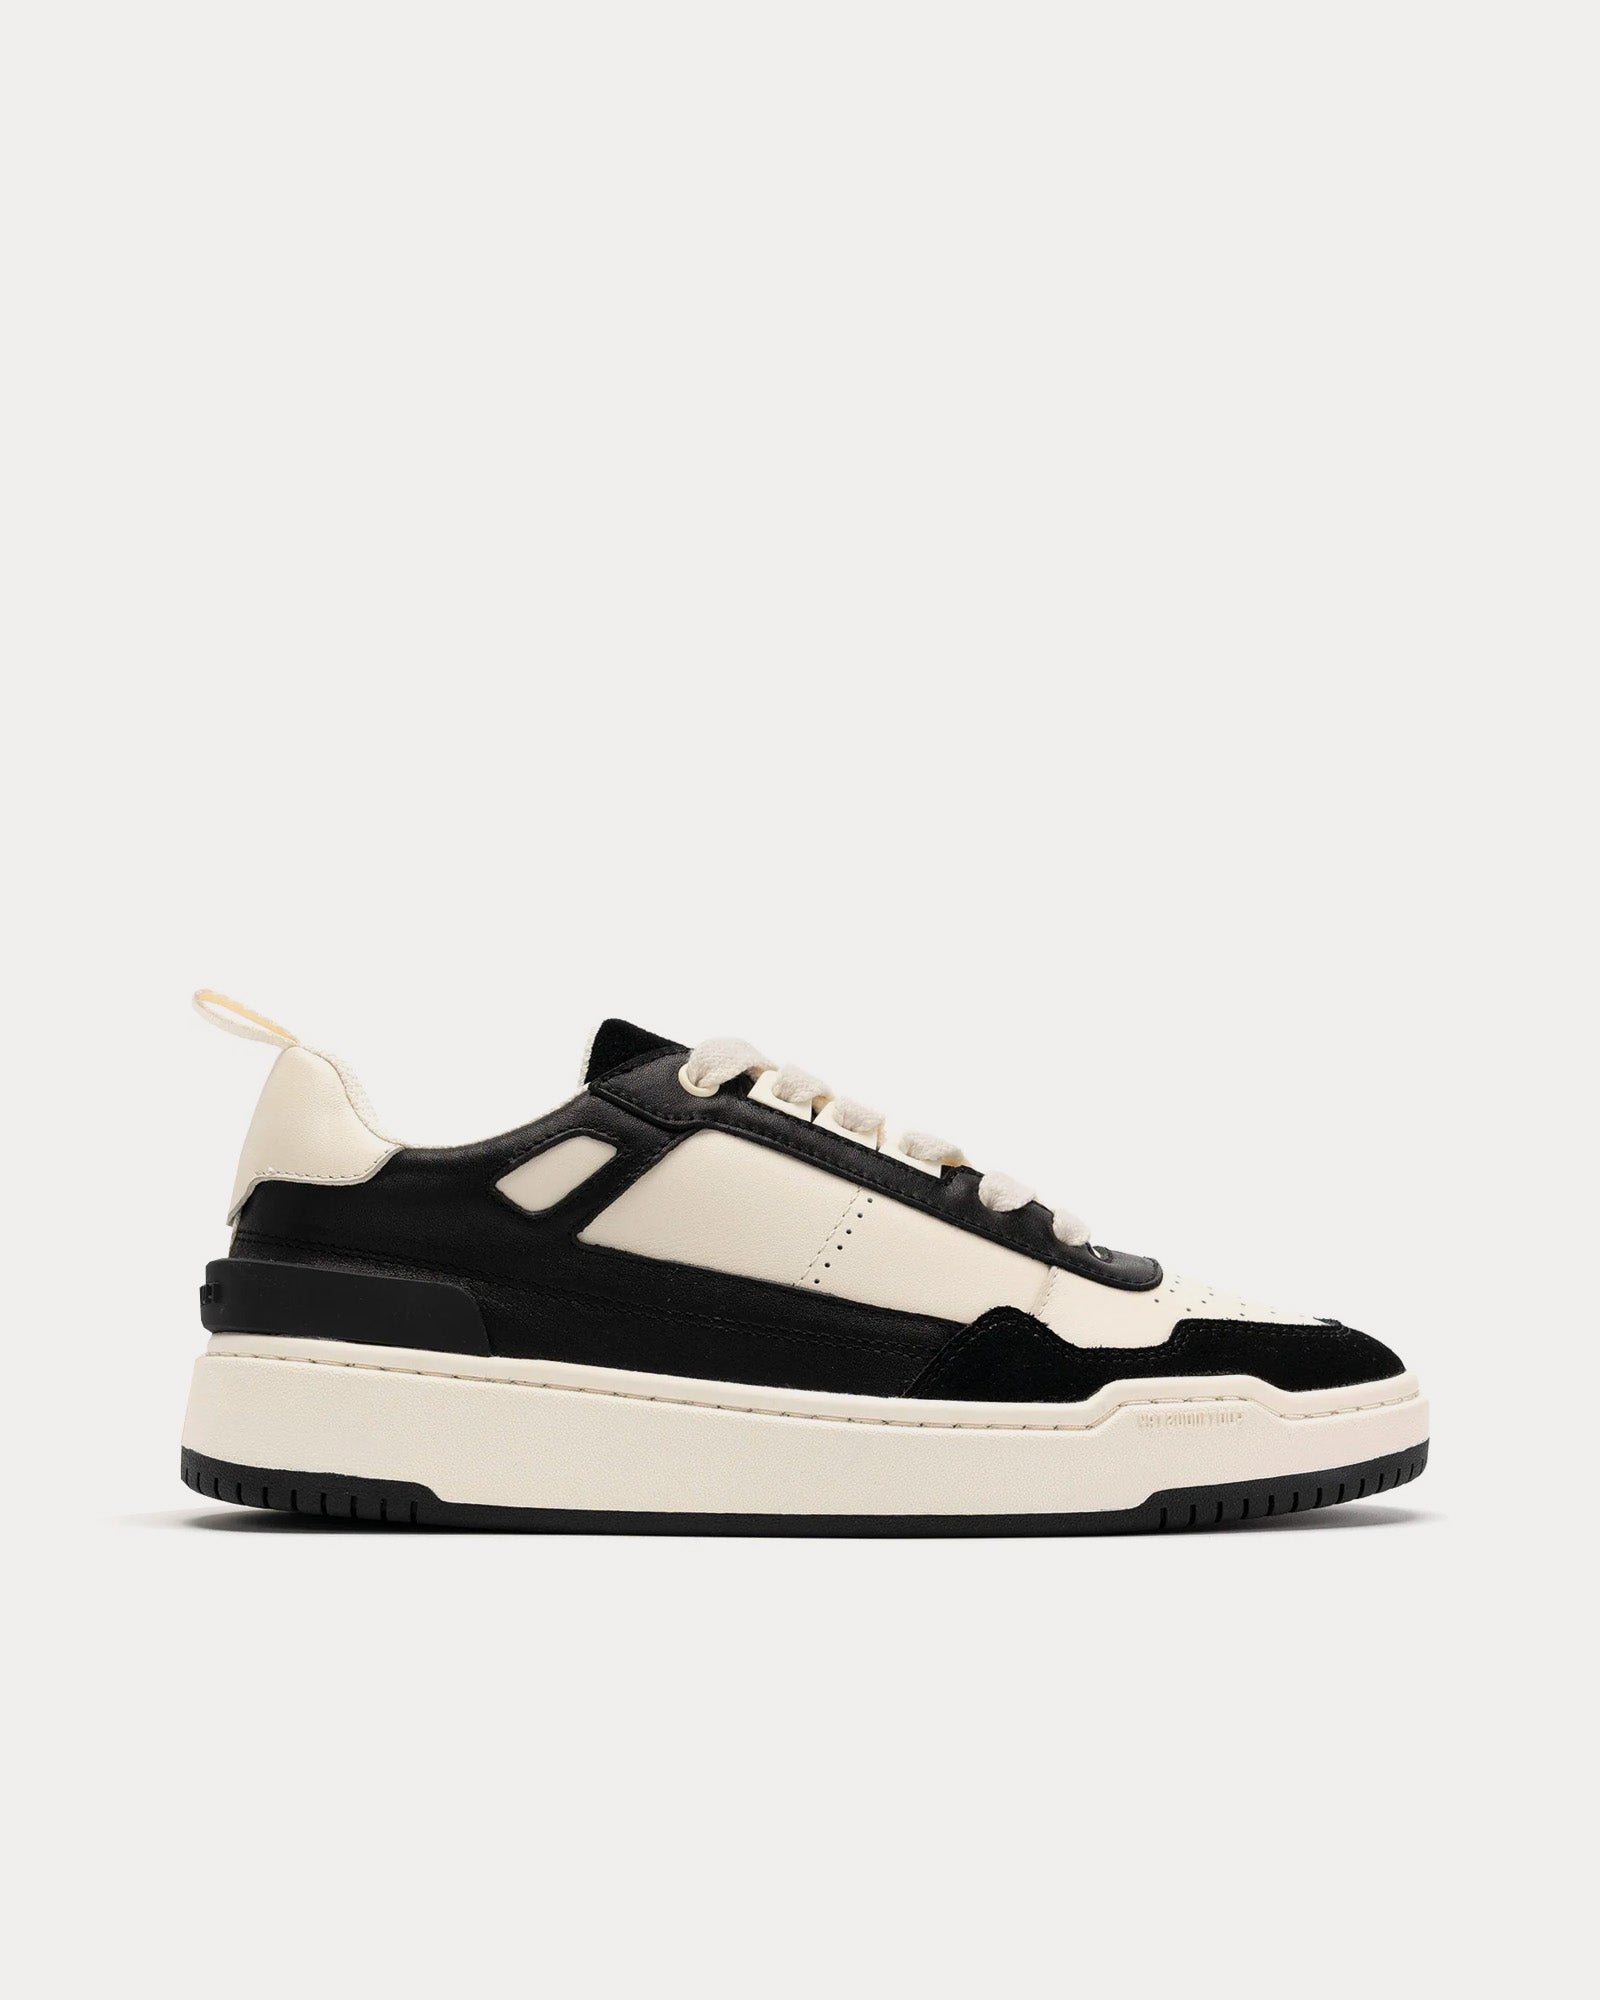 Foot Industry - 90's The Plateau Off-White / Black Low Top Sneakers